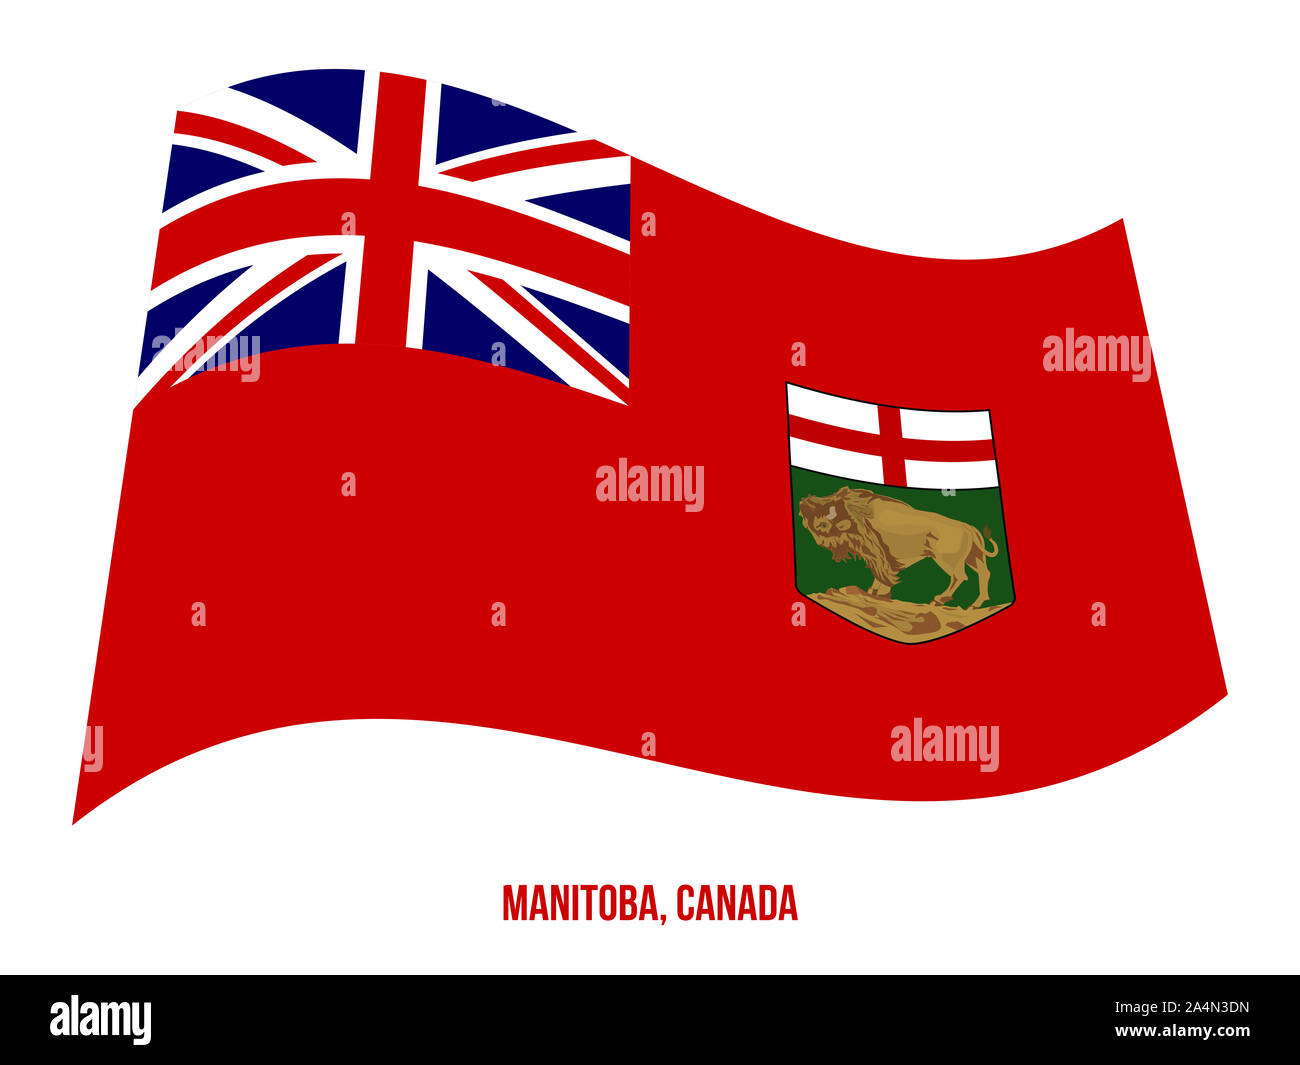 Manitoba Flag Waving Vector Illustration on White Background. Provinces Flag of Canada. Correct Size, Proportion and Colors. Stock Photo